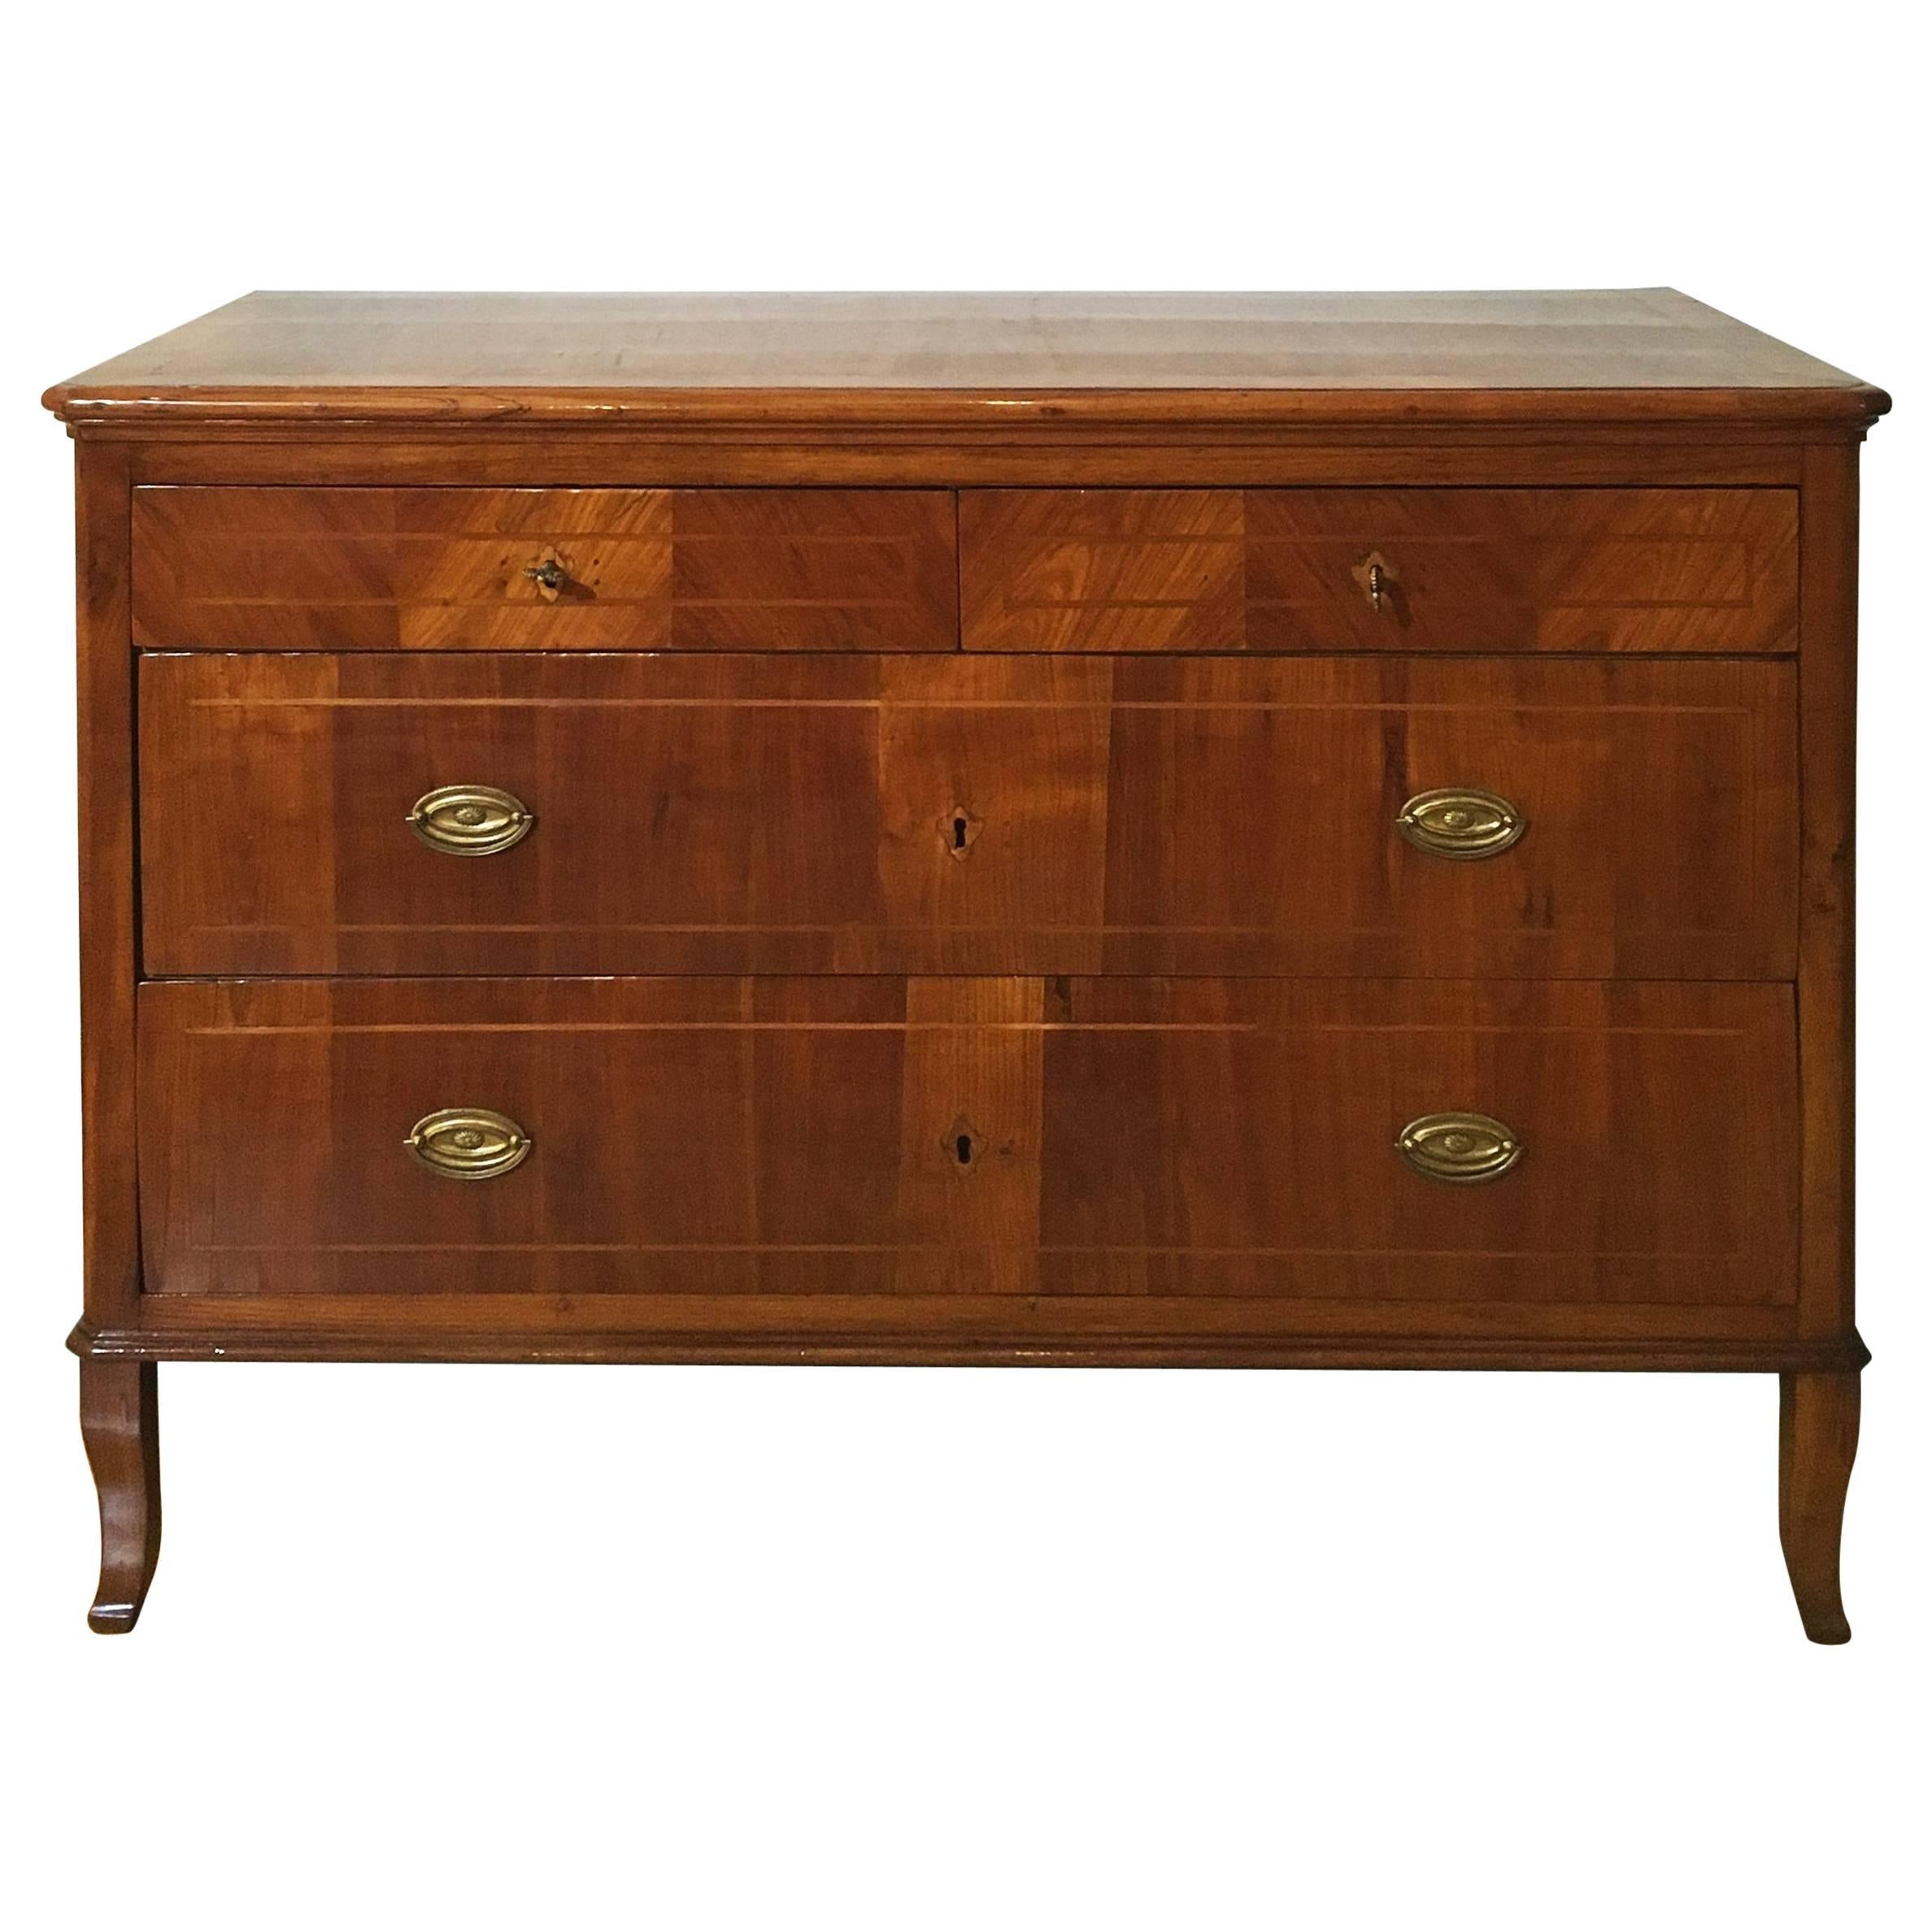 Late 18th Century Italian Louis XVI Commode or Dresser in Solid Cherrywood For Sale